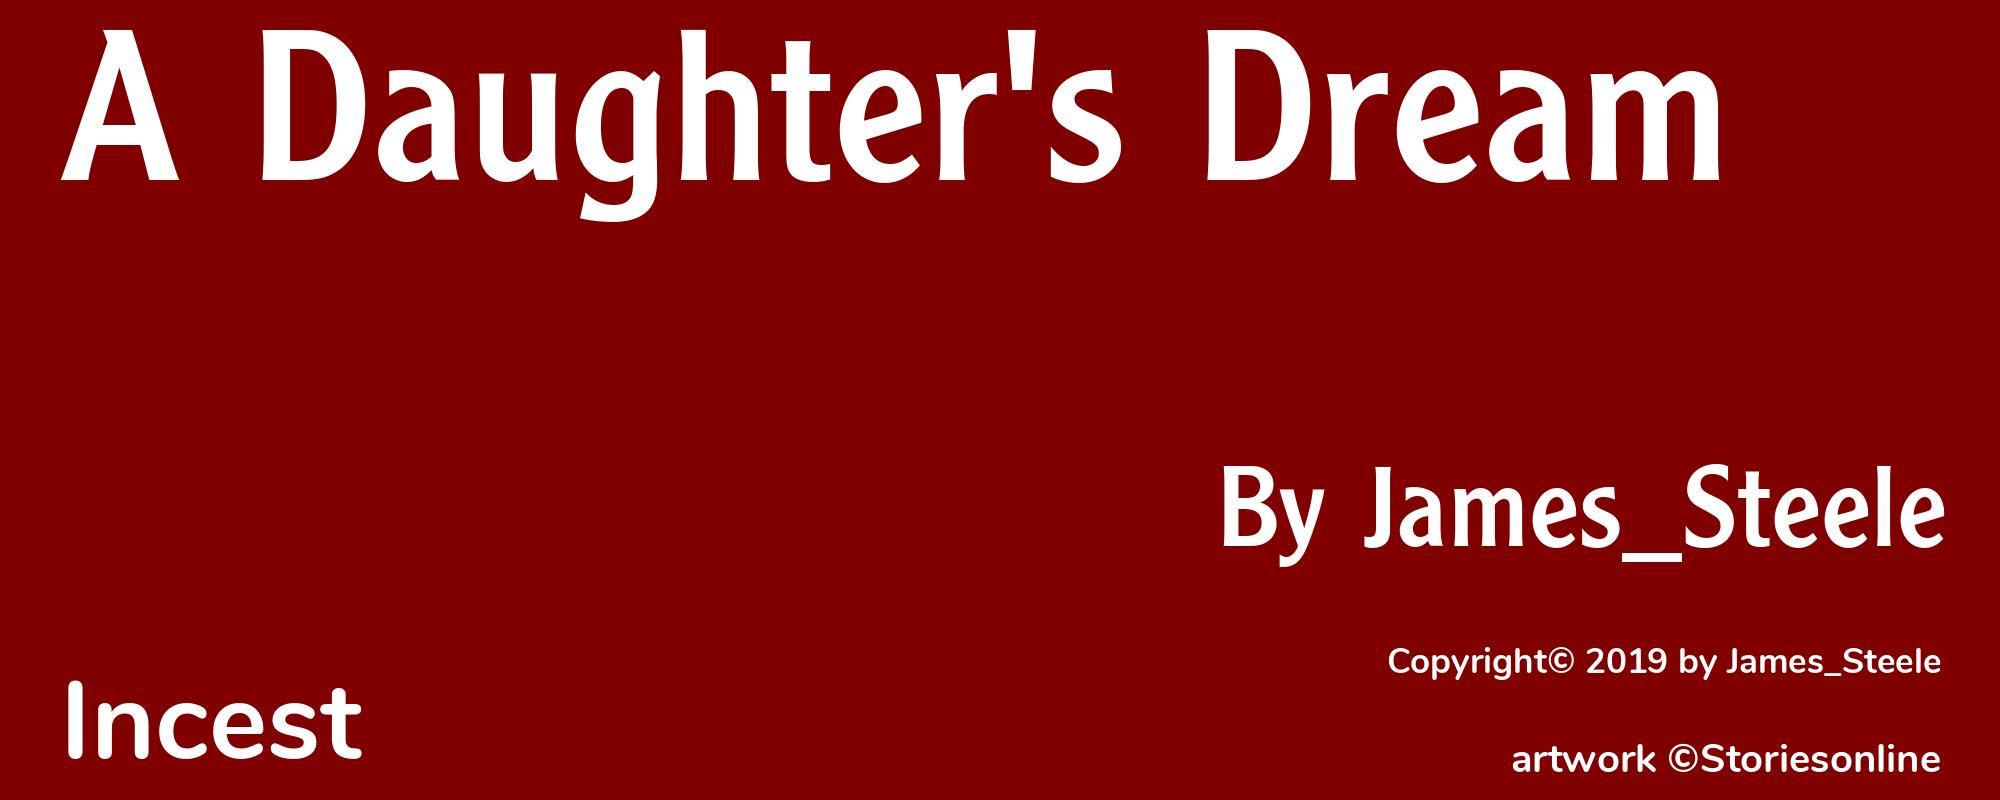 A Daughter's Dream - Cover